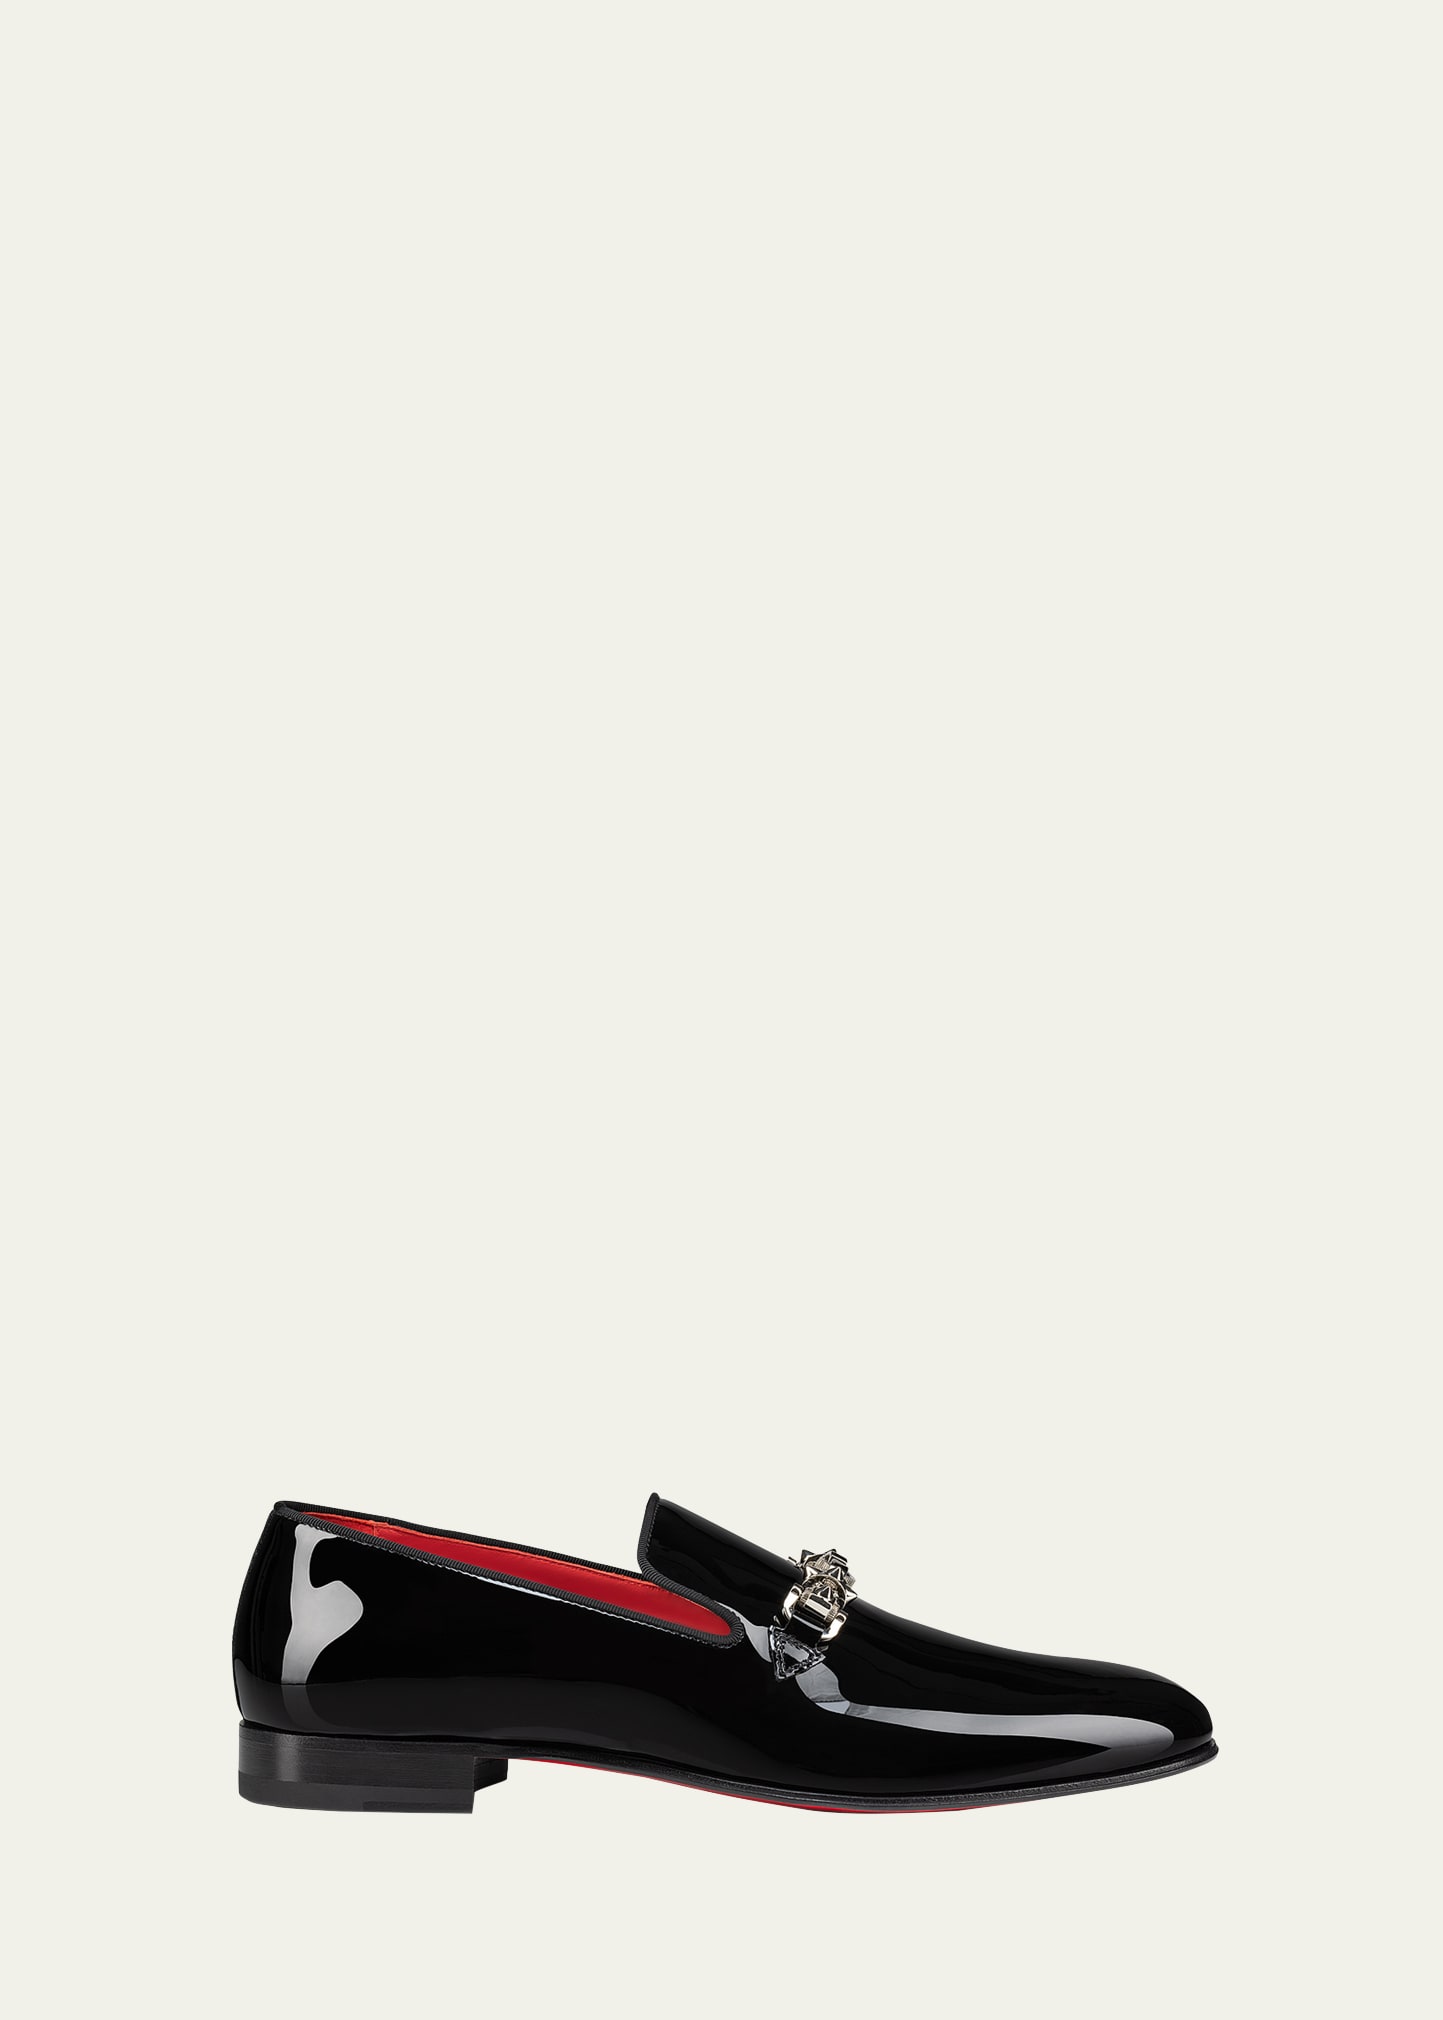 Shop Christian Louboutin Men's Equiswing Patent Bit Loafers In Black